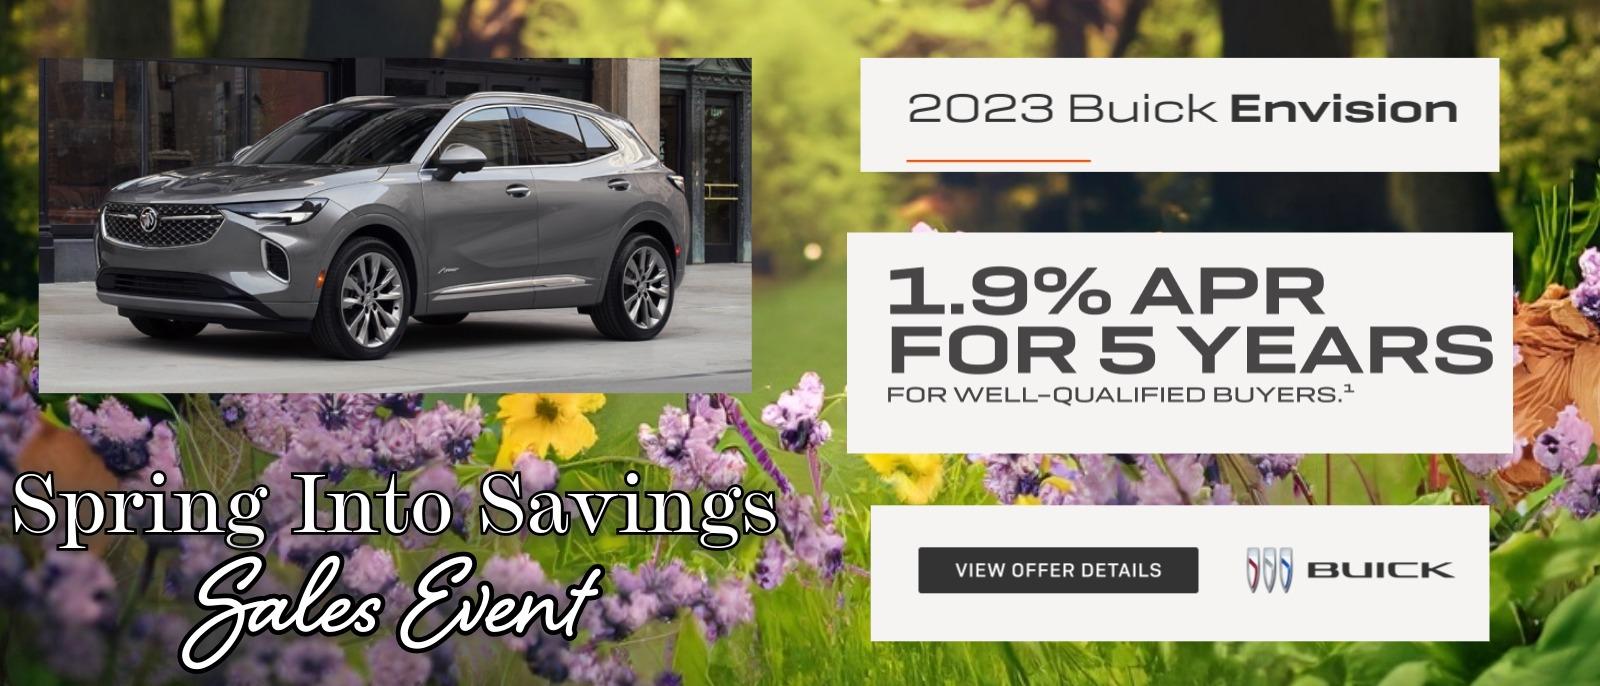 Spring Into Savings Sales Event - 2023 Buick Envision Slide